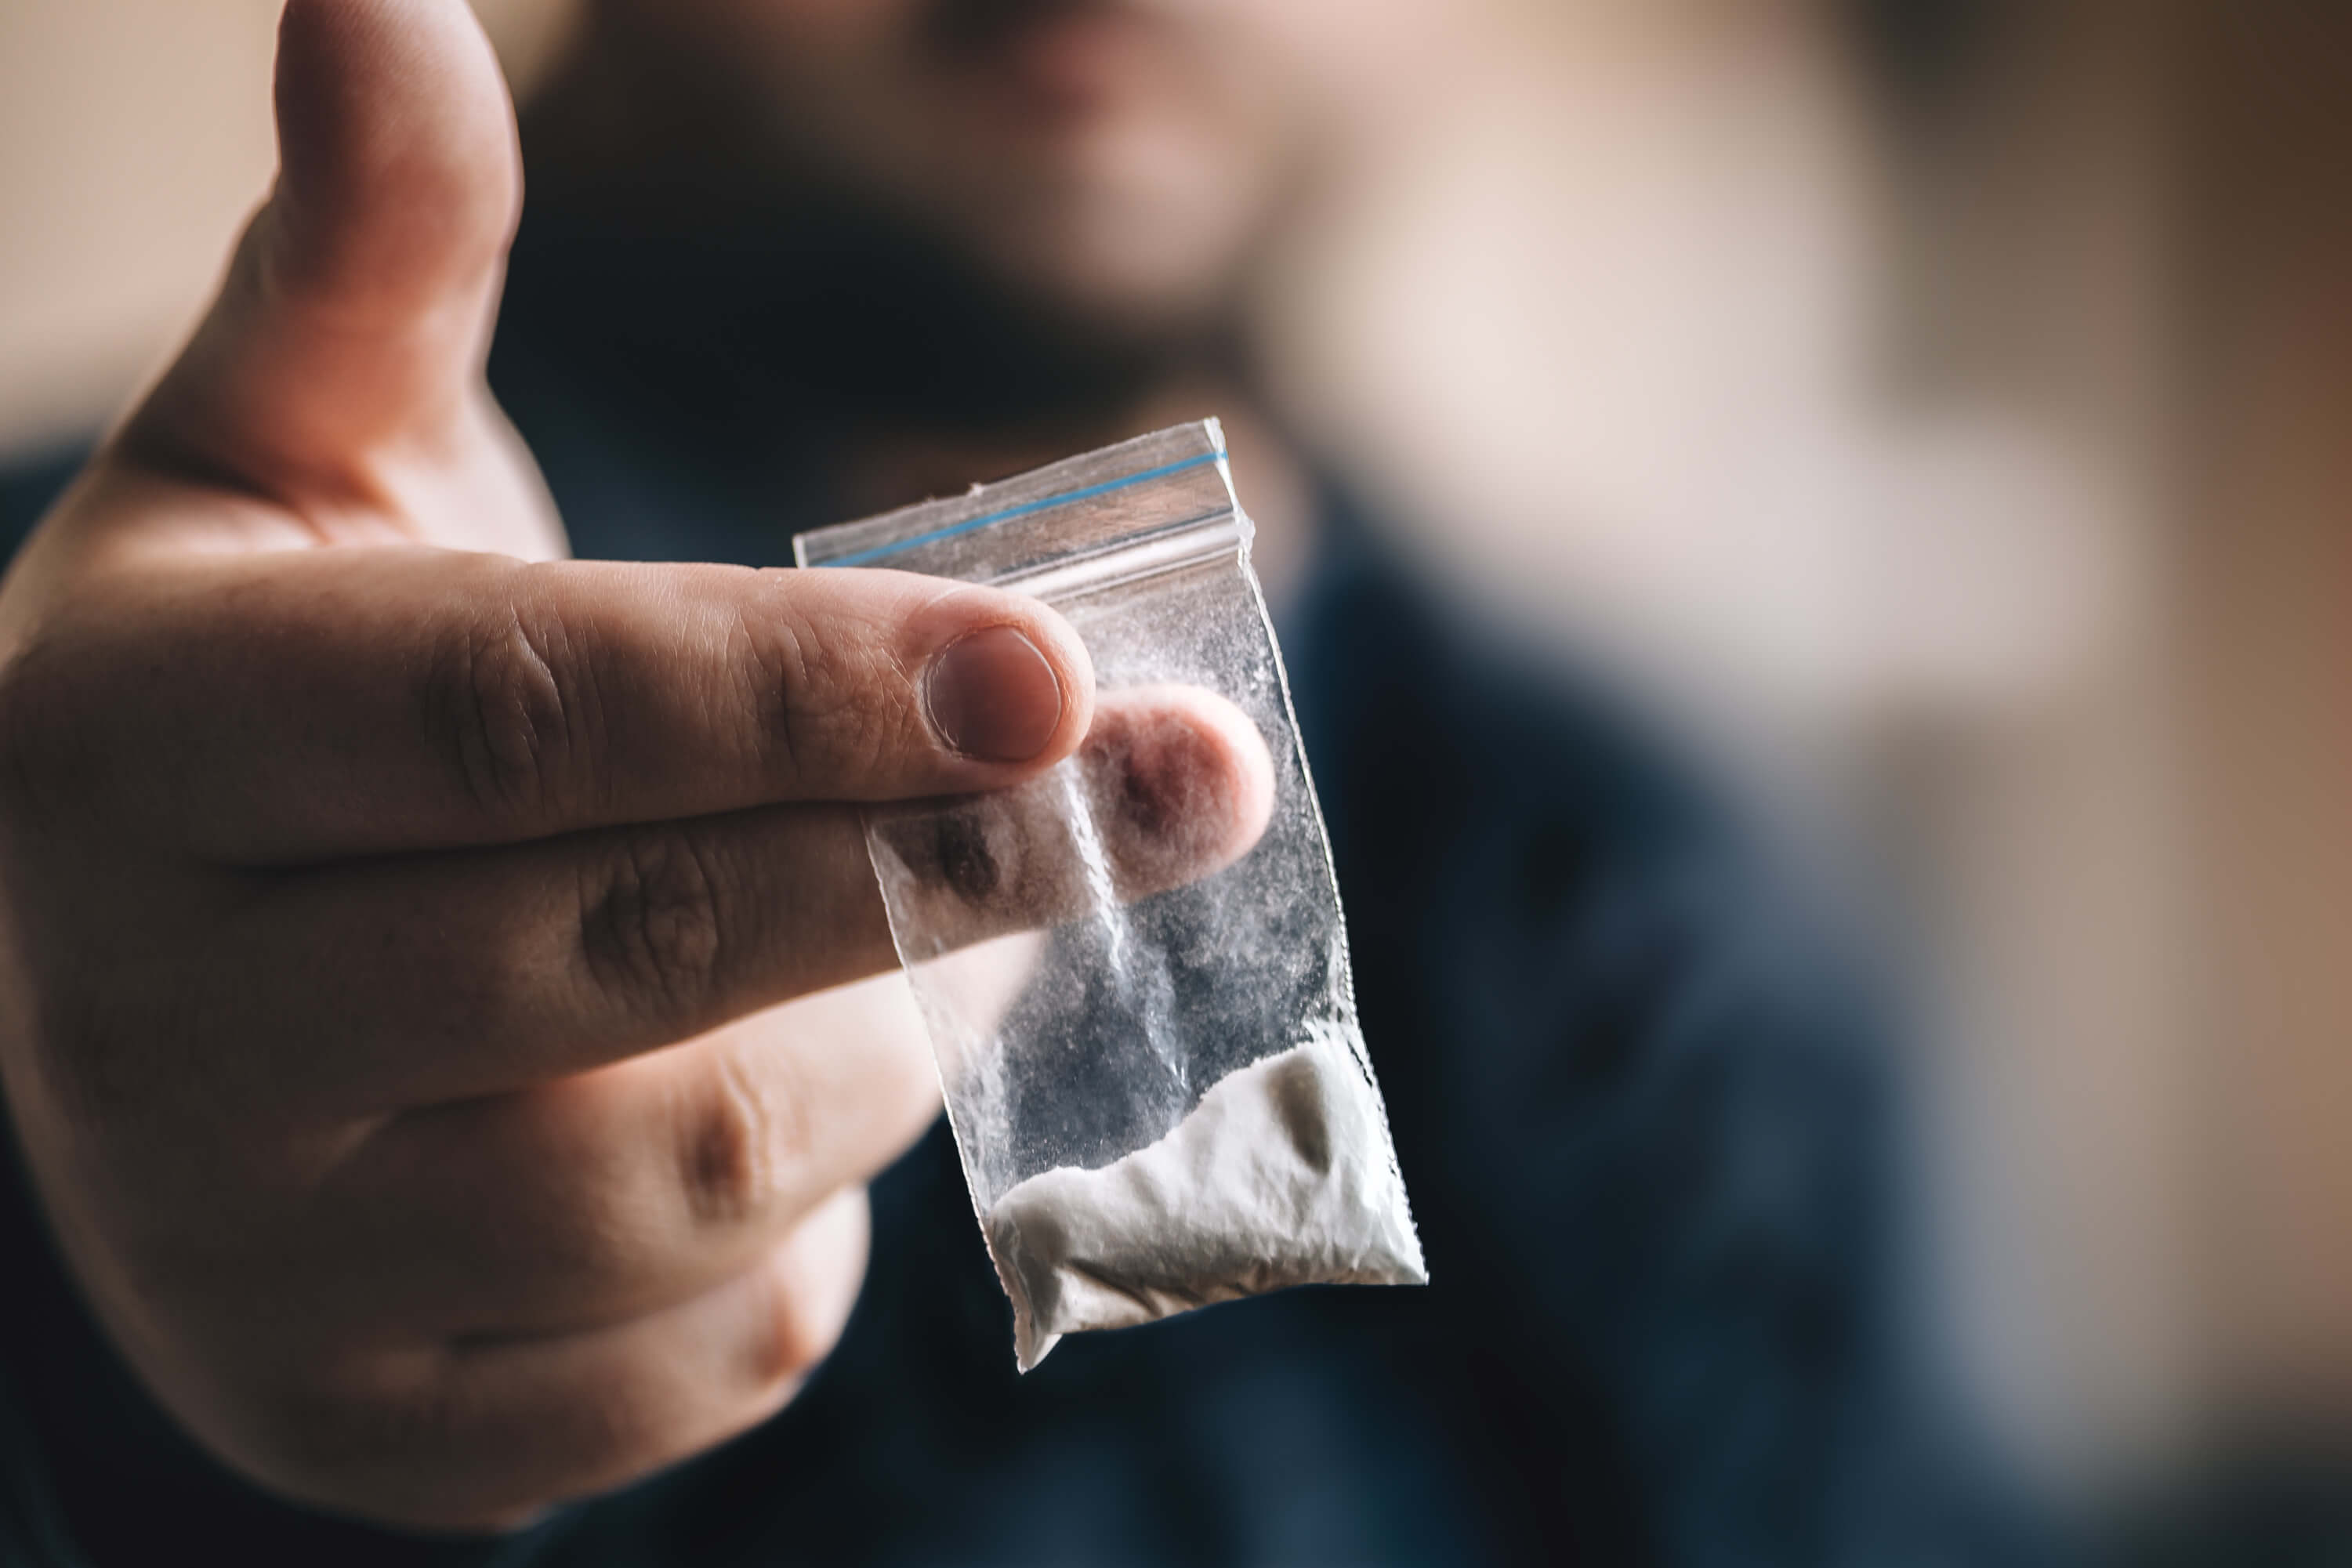 close-up photo of a person holding a small bag of cocaine between their fingers